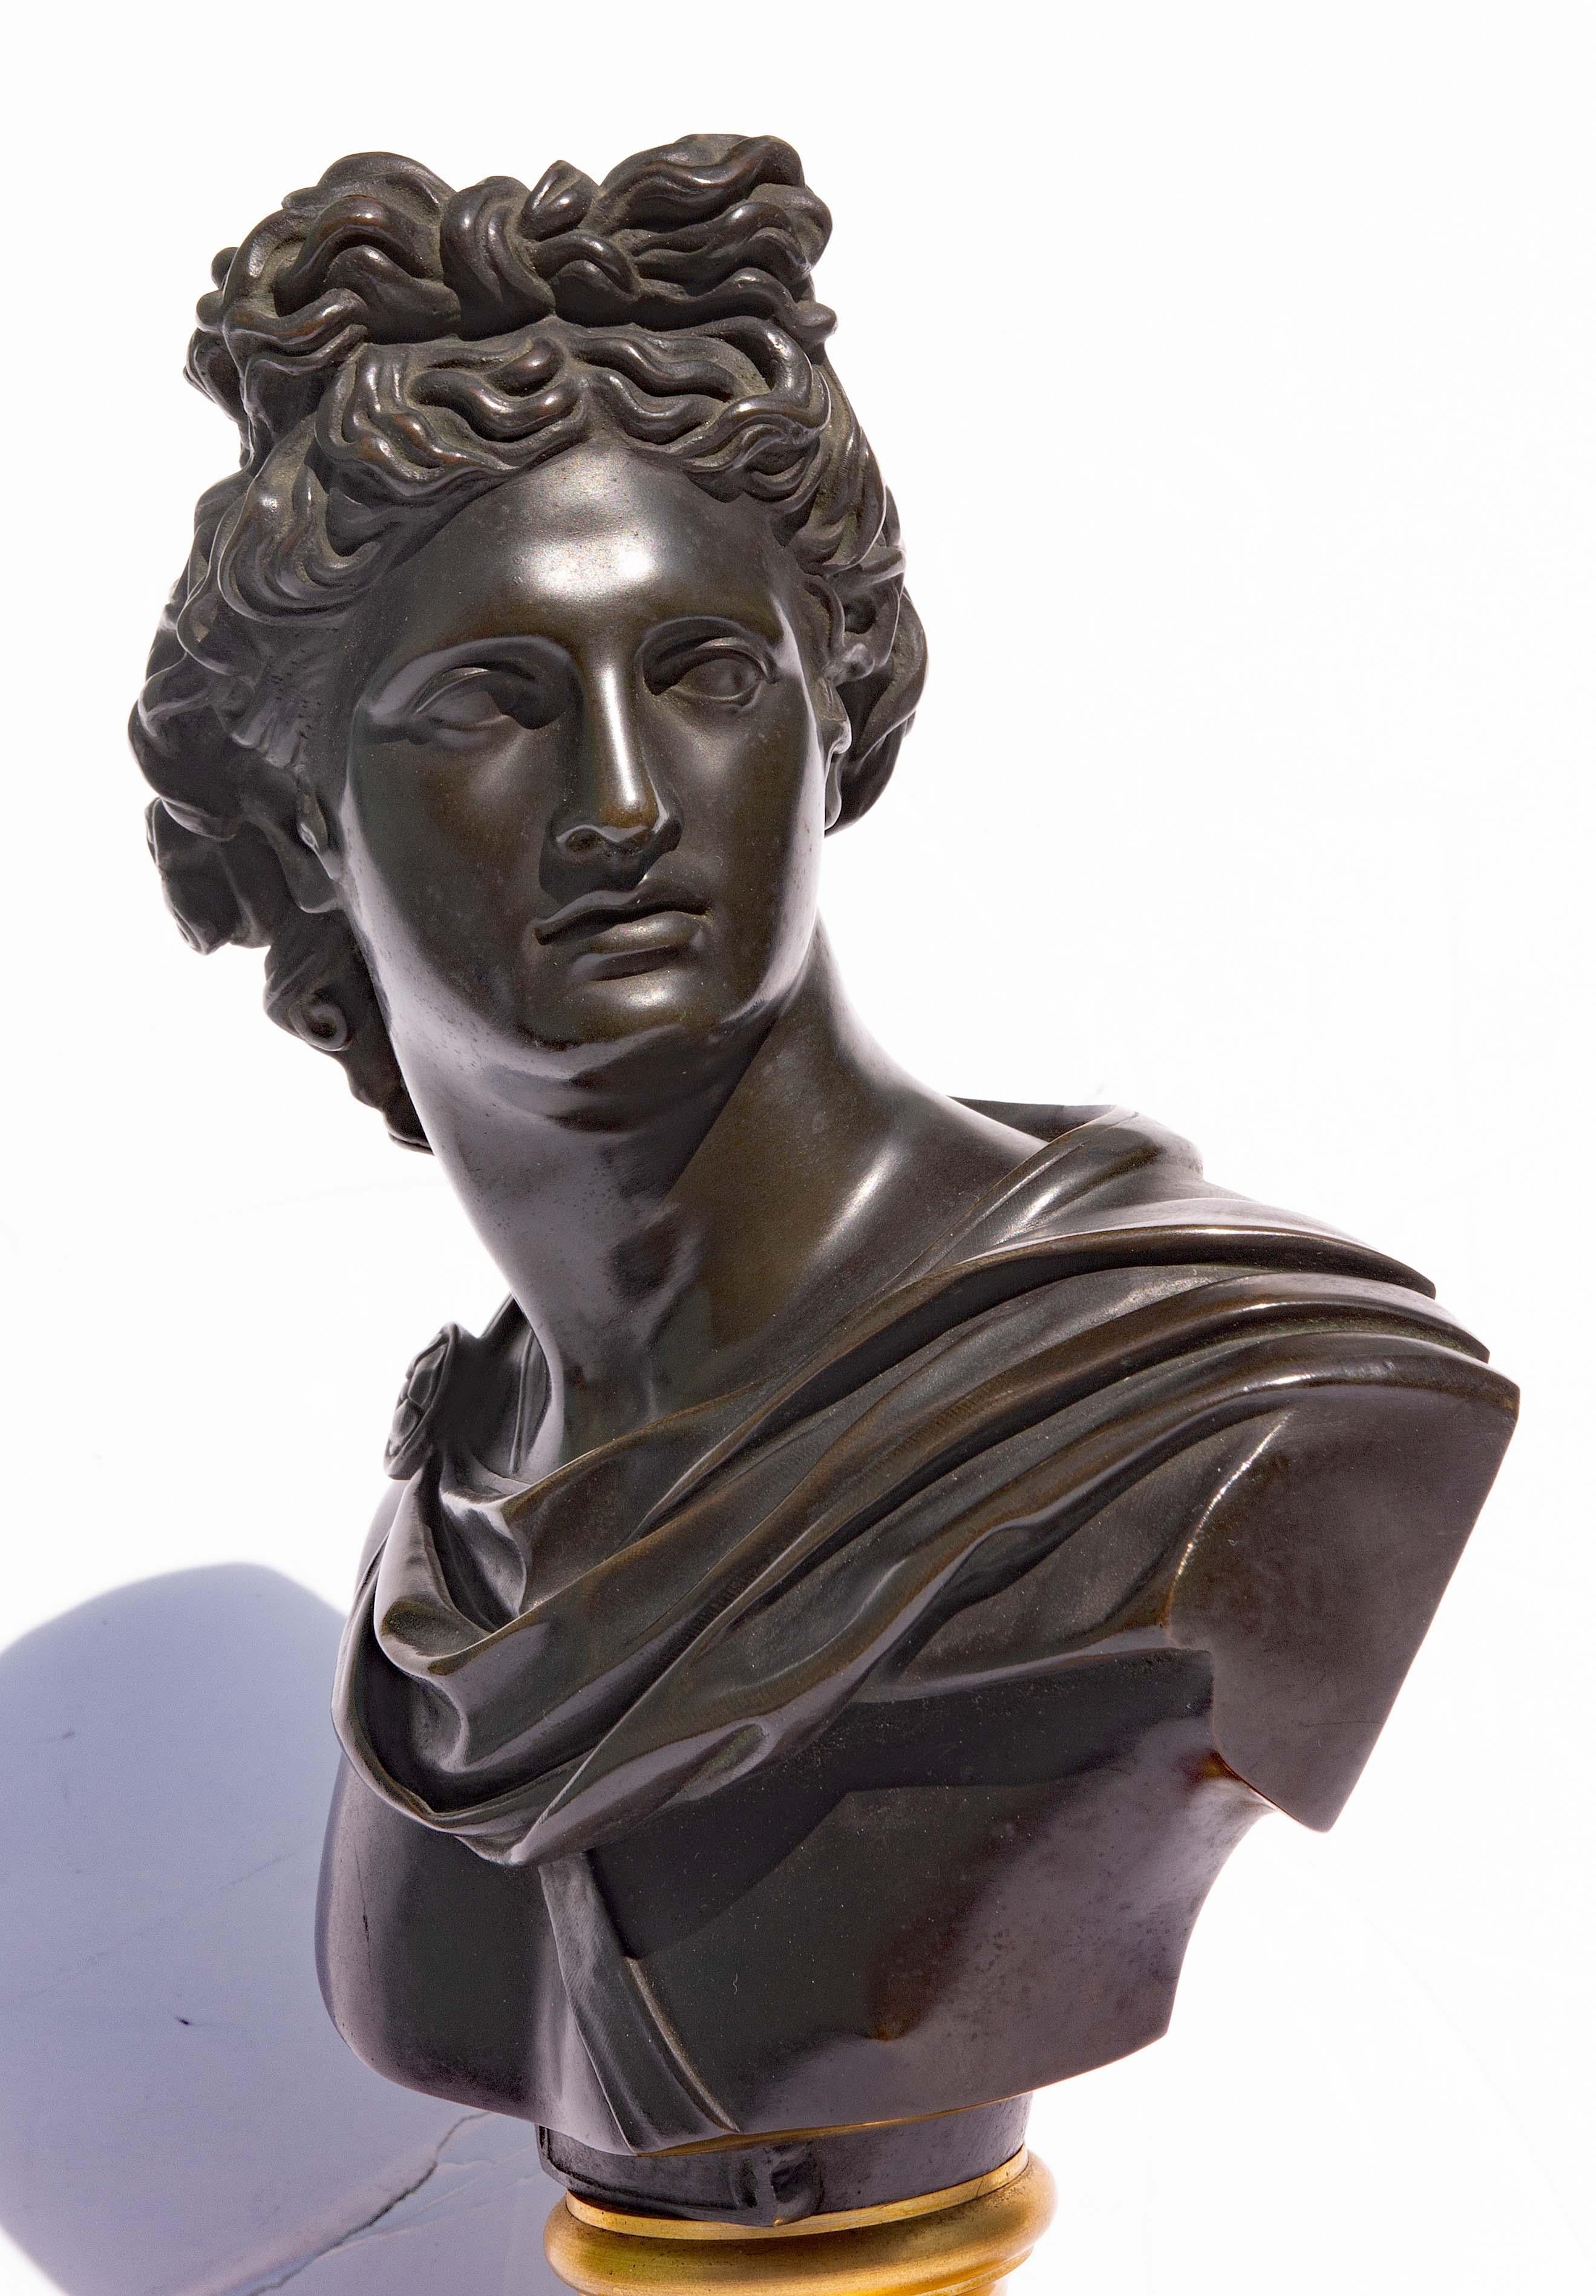 Superb 19th century bronze and gilt bronze bust of the god Belvedere Apollo. Circa 1850. This wonderful grand tour bust is a marvel of refined beauty and elegance, crafted with richly patinated bronze-mounted on a gilt bronze socle and rouge marble